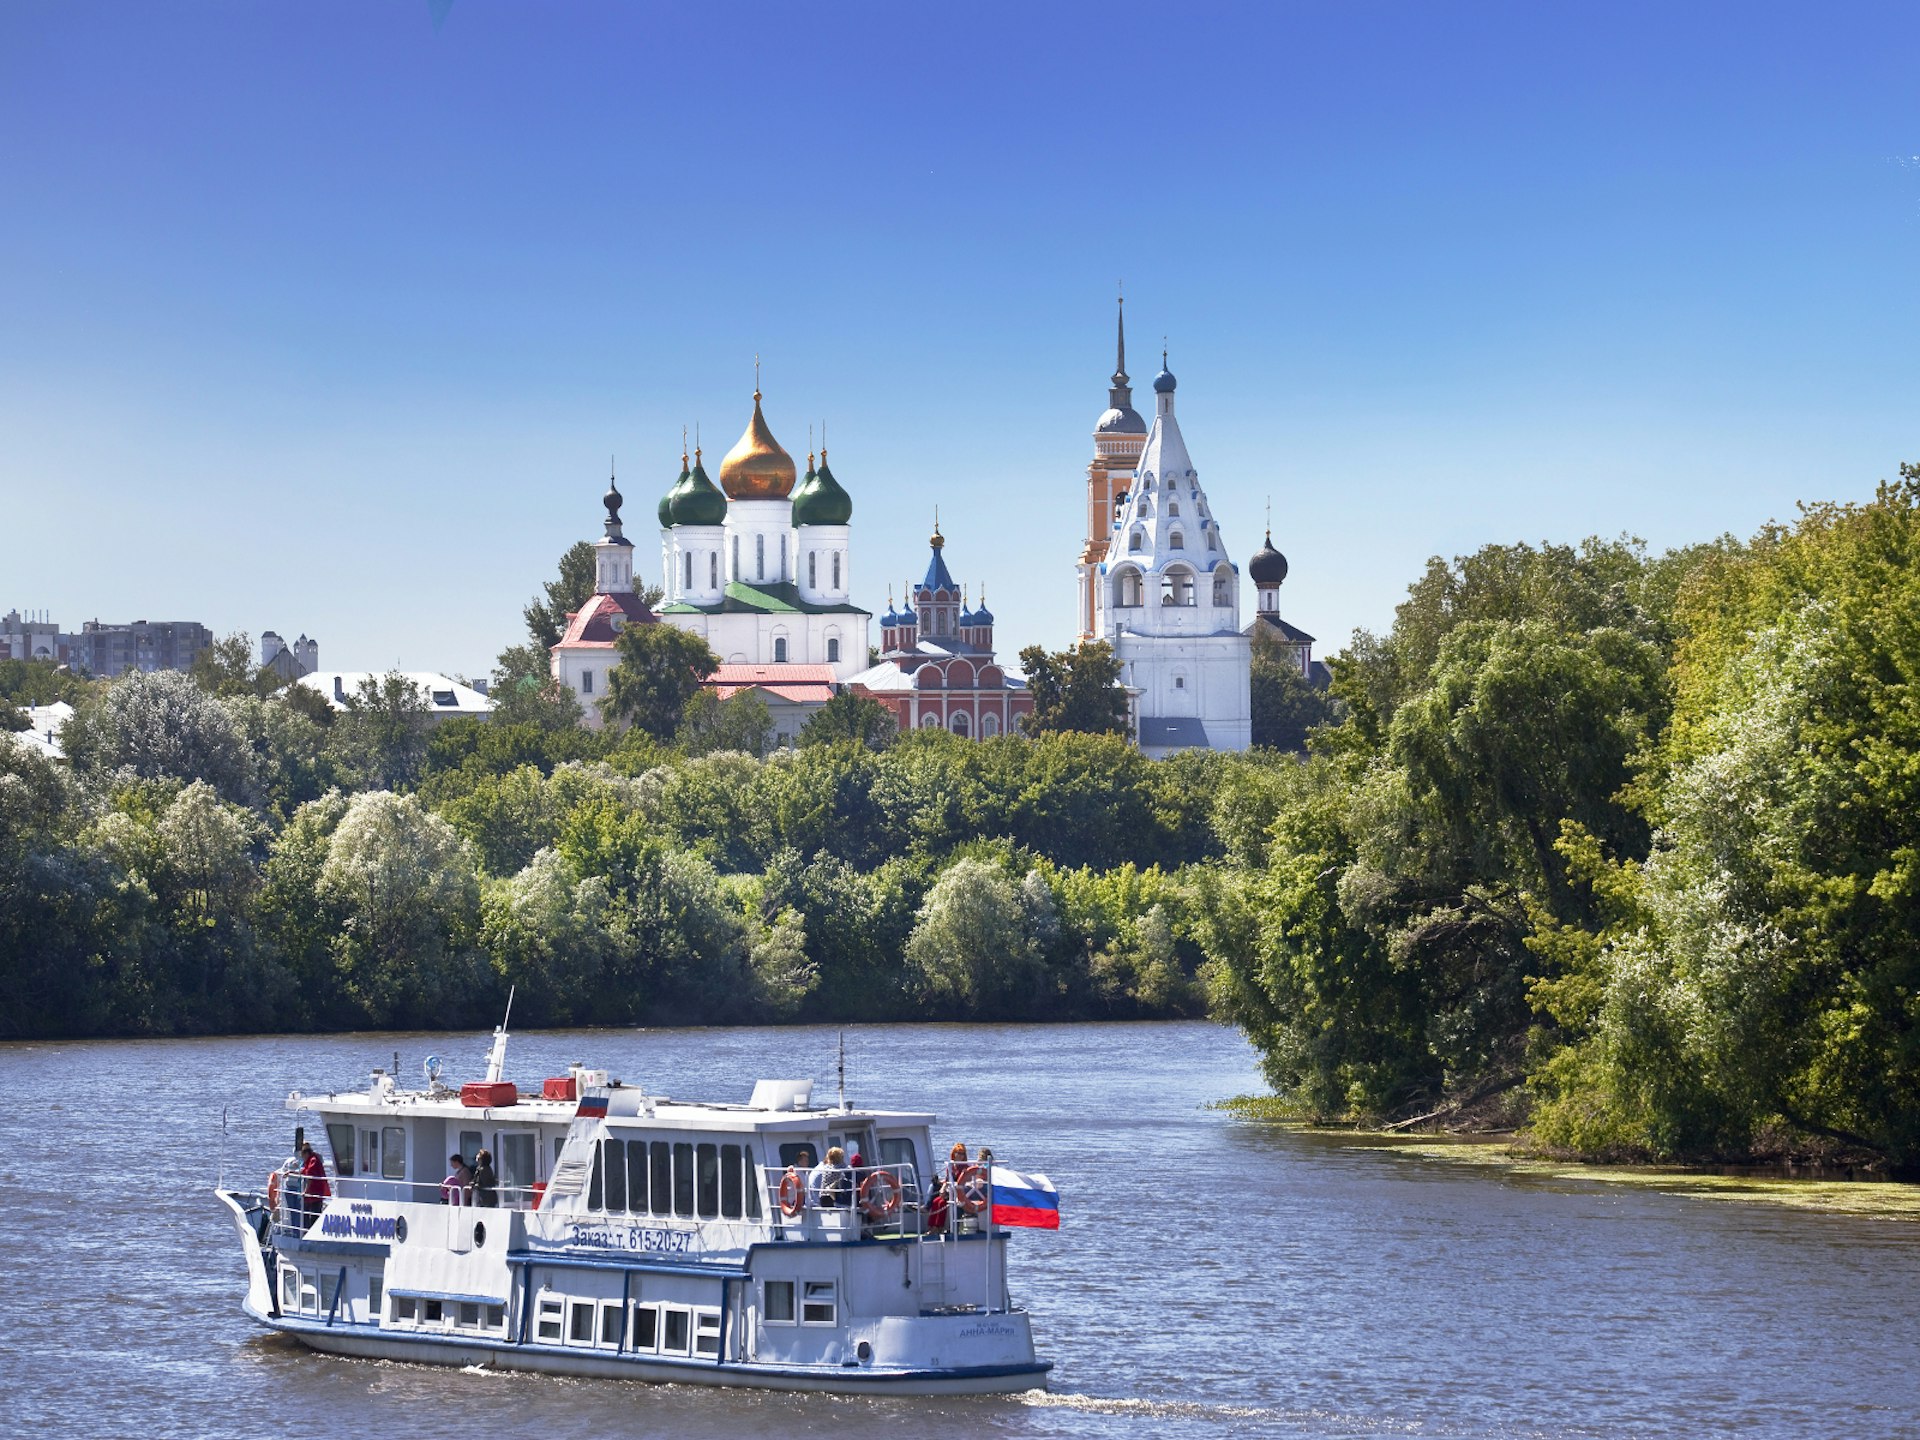 The kremlin in Kolomna, another popular day trip from Moscow and a stop for river cruises © Natalia Volkova / Shutterstock